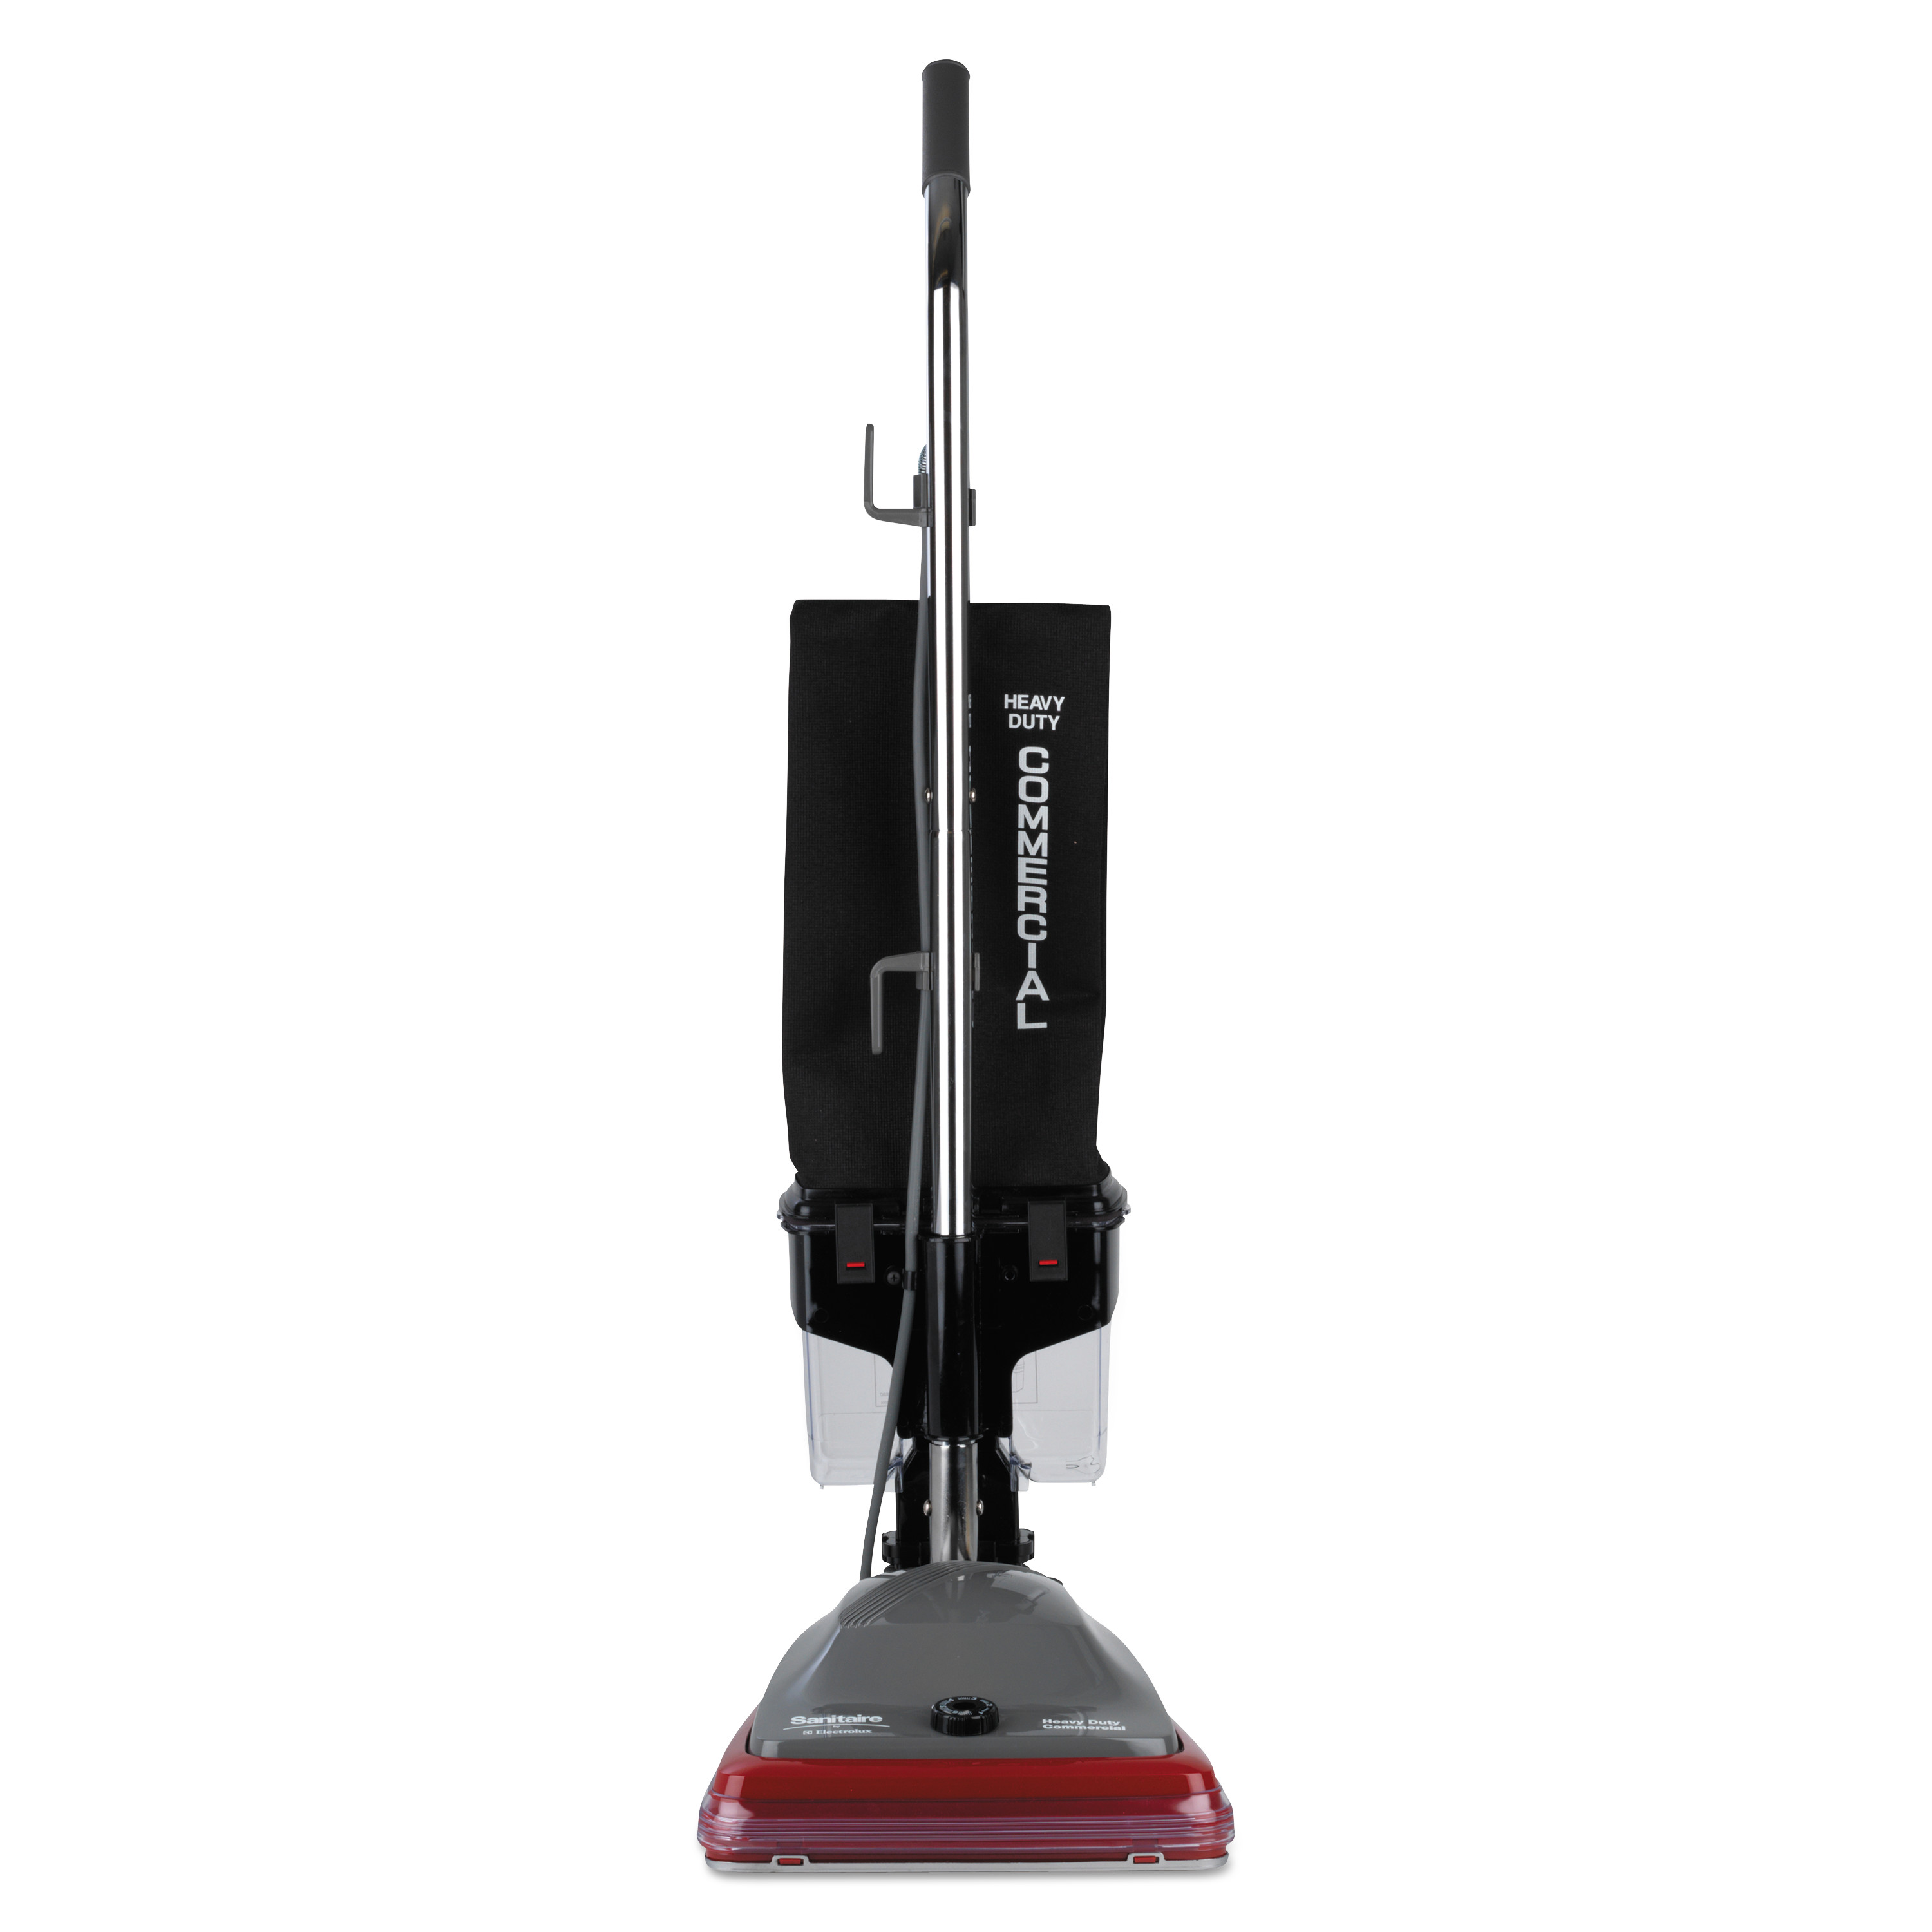  Sanitaire SC689B TRADITION Upright Vacuum with Dust Cup, 5 amp, 14 lb, Gray/Red (EURSC689B) 